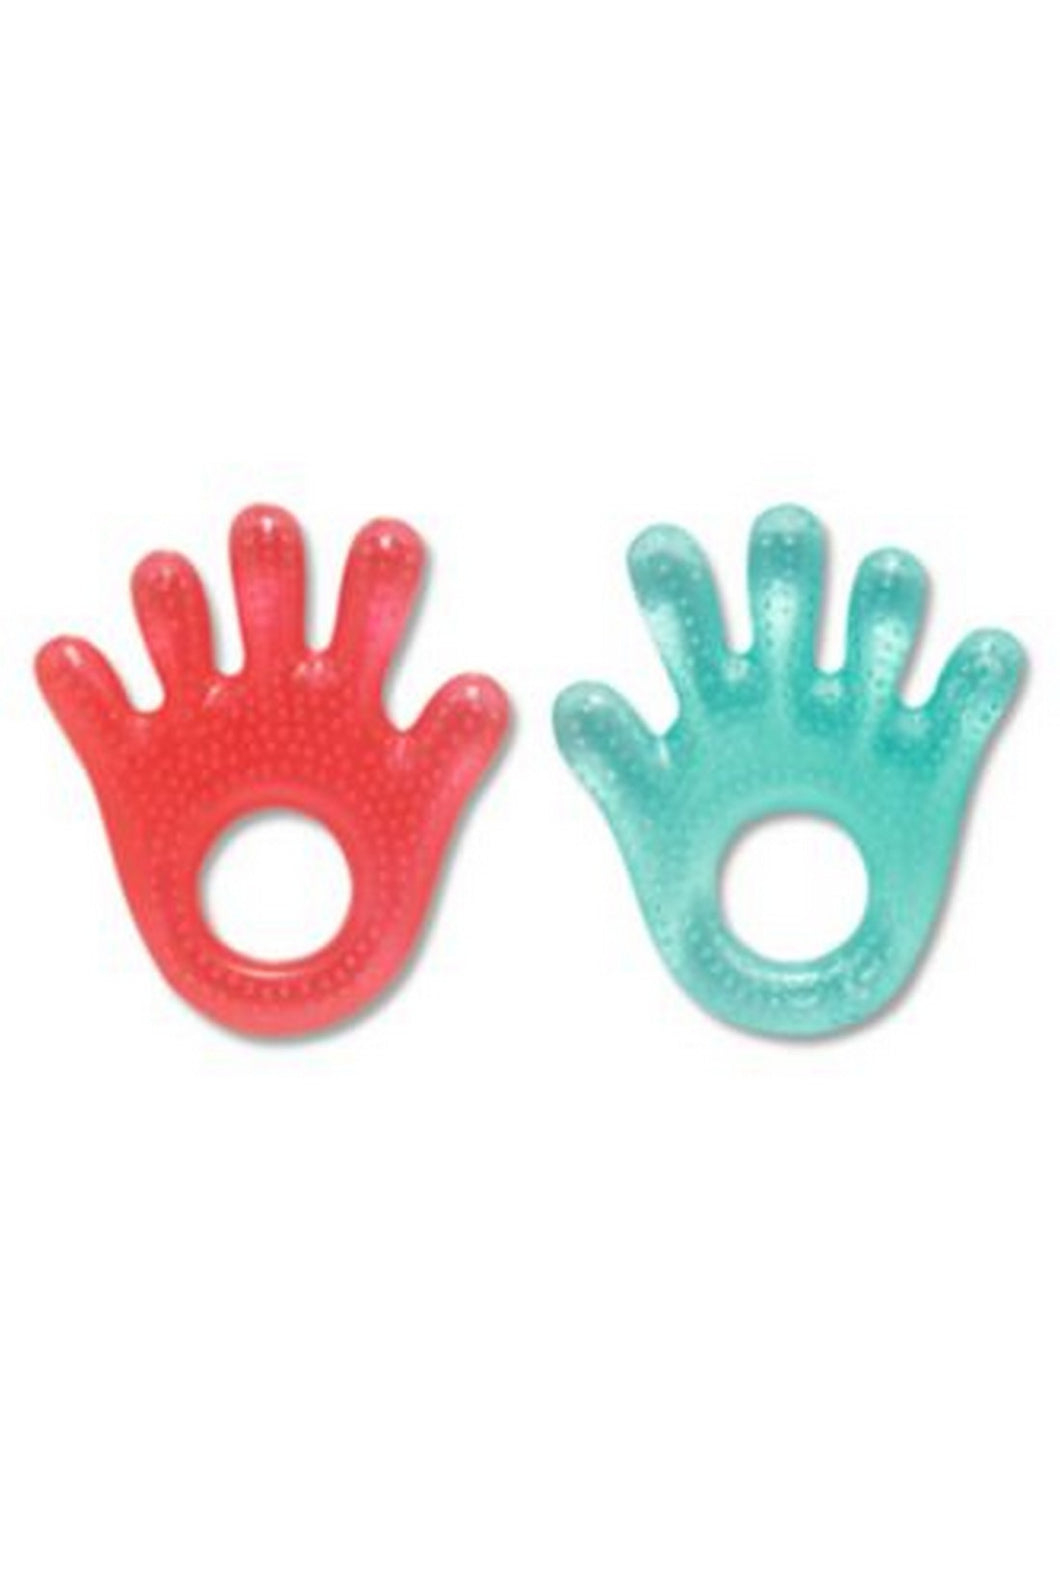 Mothercare Water Filled Hand Teether 2 Pack